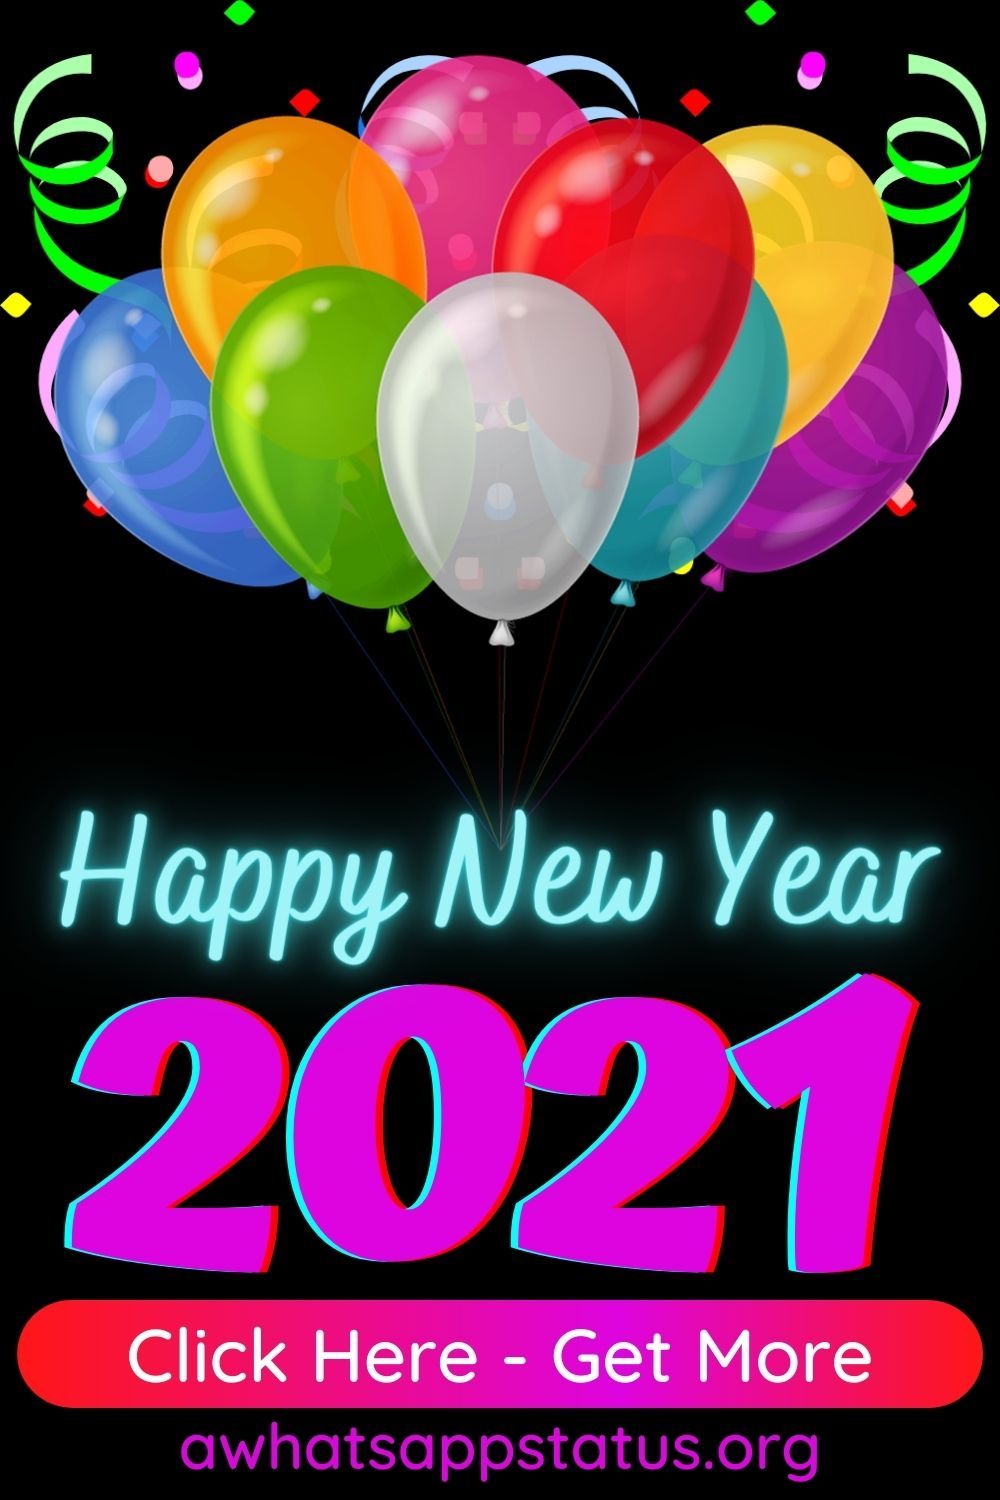 Happy New Year 2021 Wallpaper HD Decoration With Colorful Balloons And Glowing Tex. Happy new year picture, Happy new year photo, Happy new year